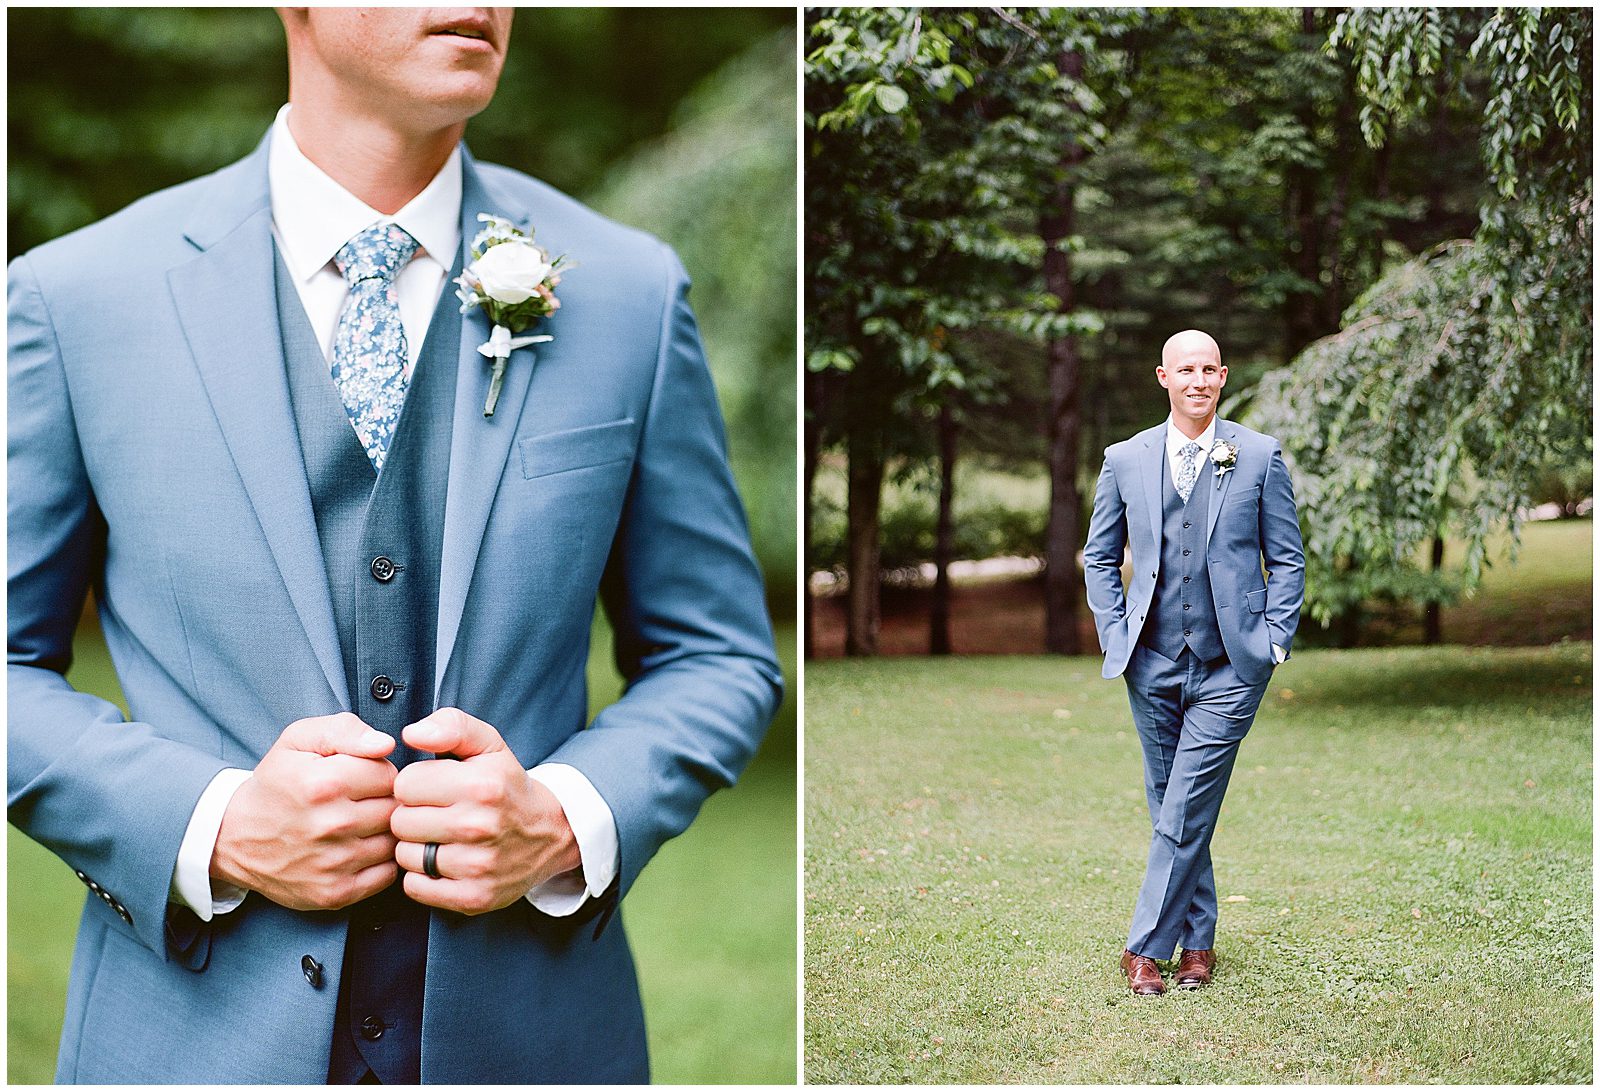 Groom in a Blue Suite with Floral Tie Photos